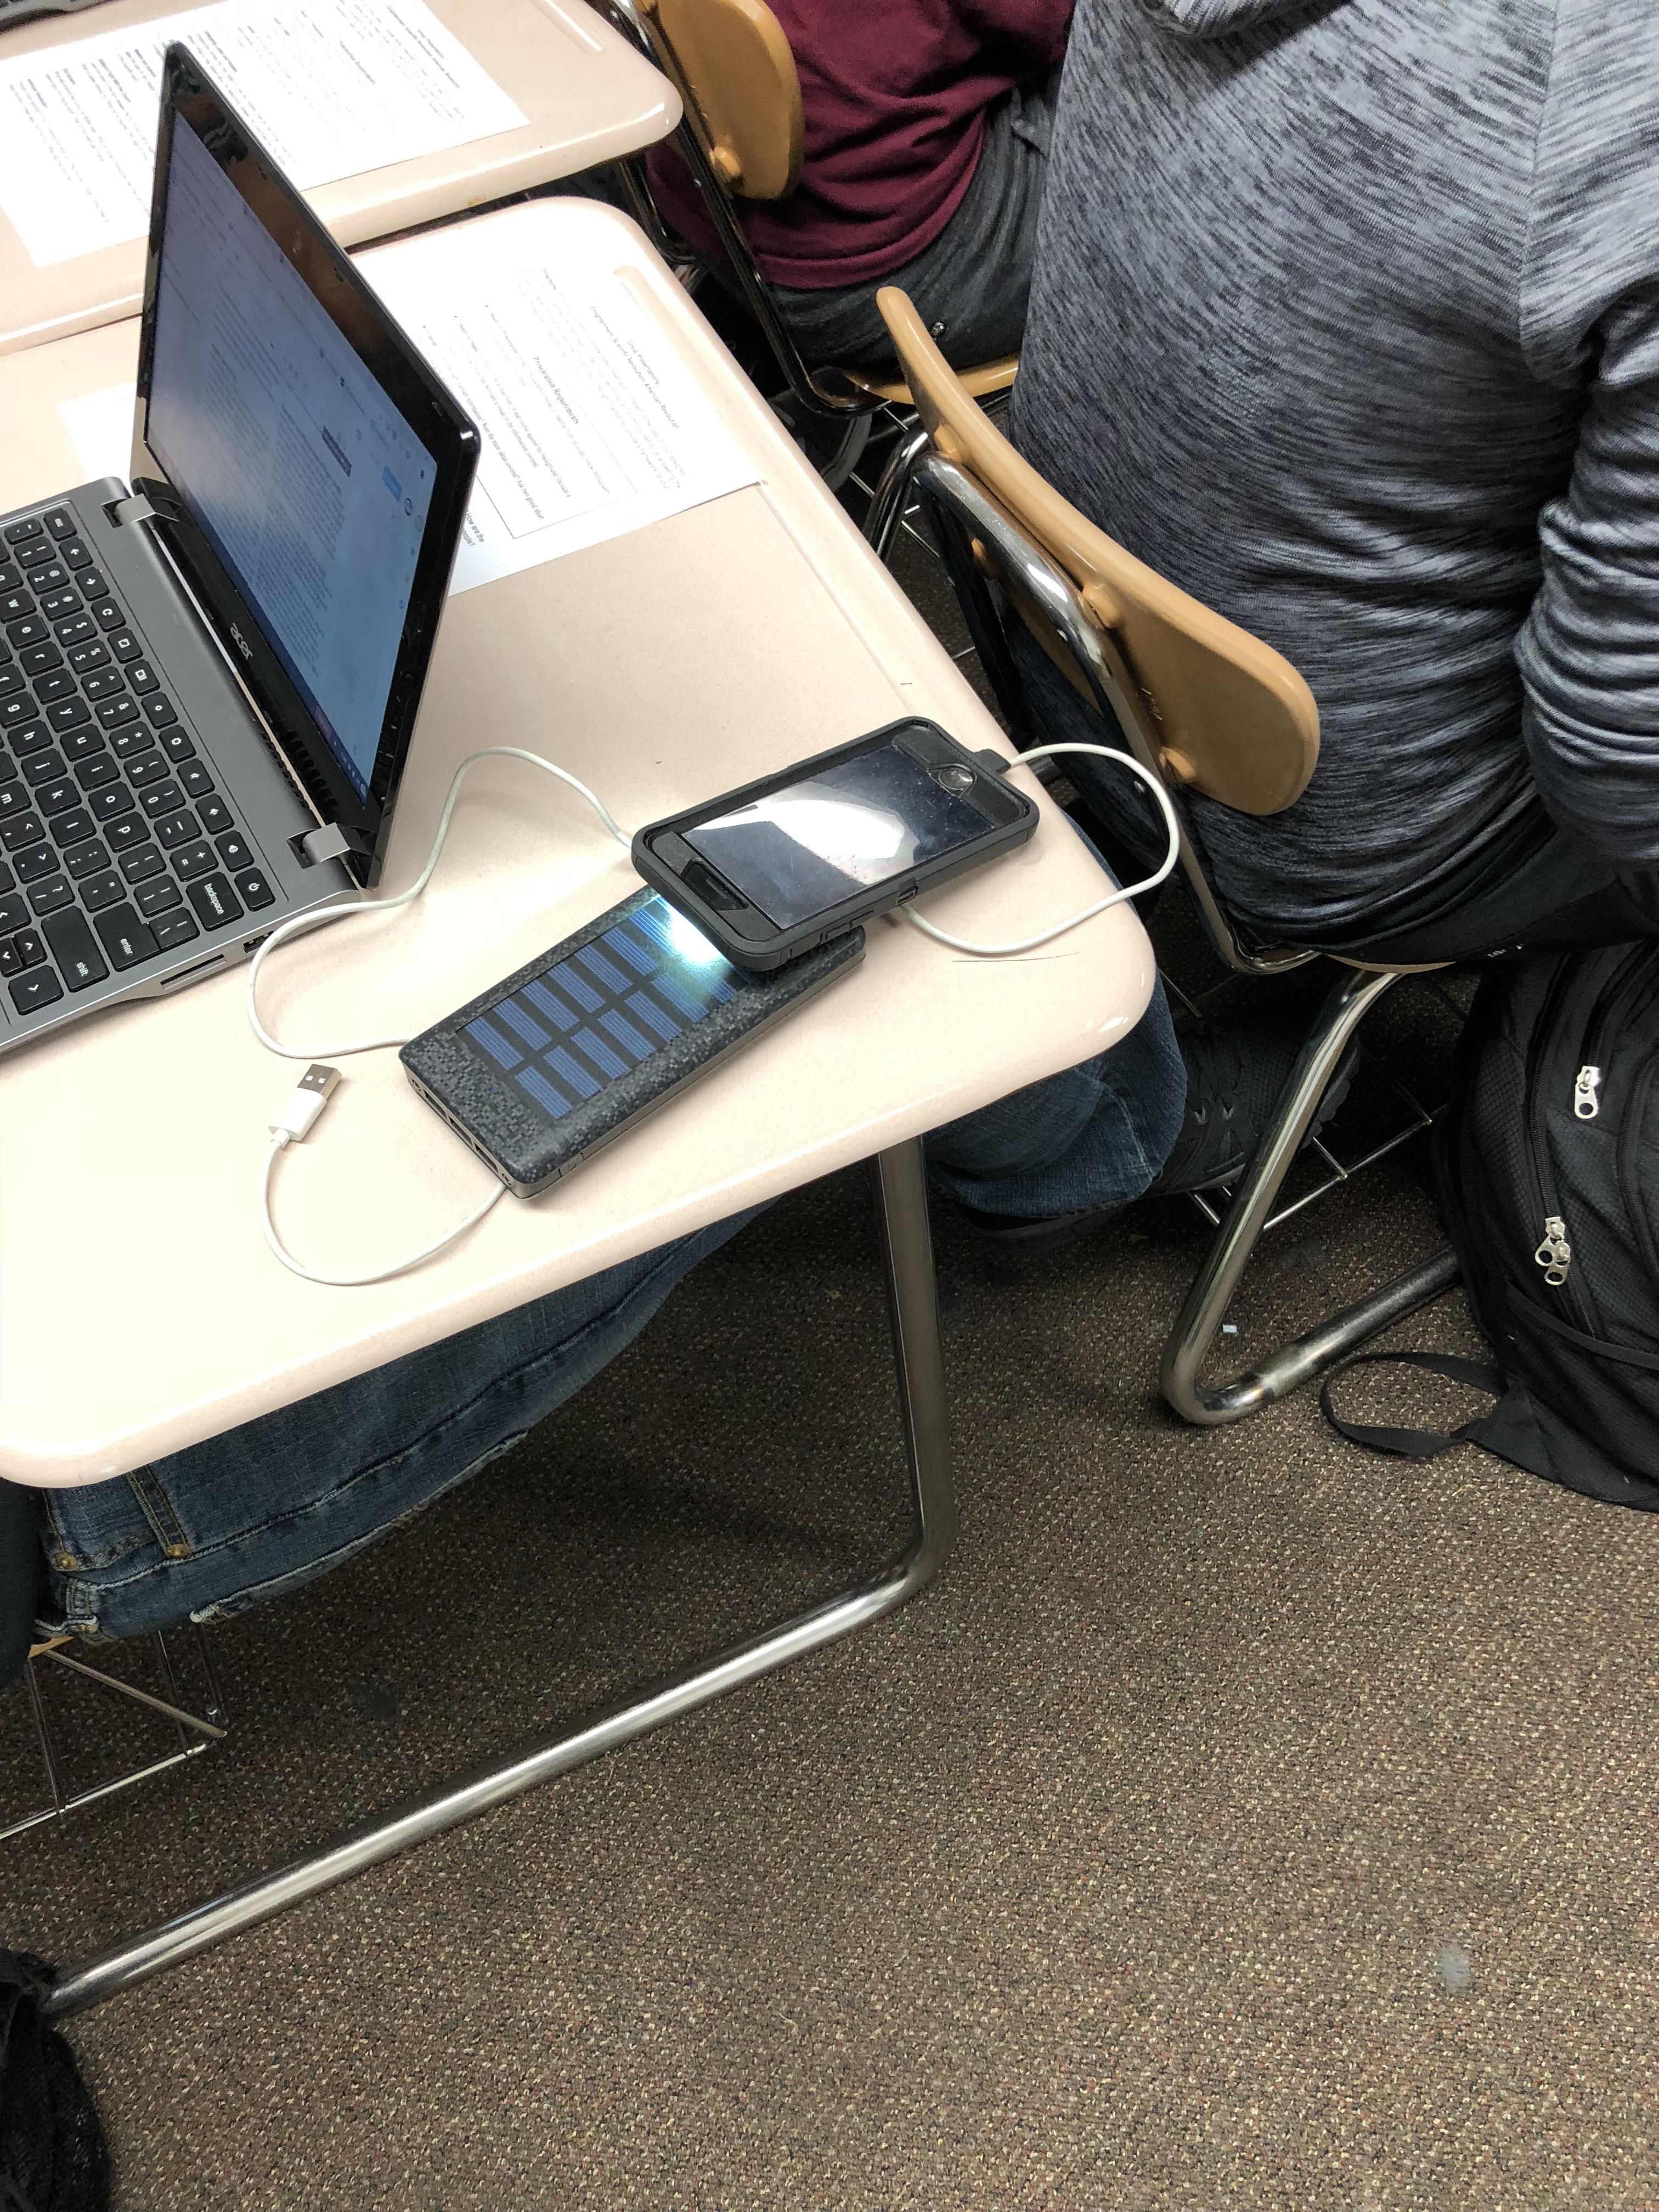 Student tries to charge solar panel external battery using the light from their phone so that they can charge their phone.